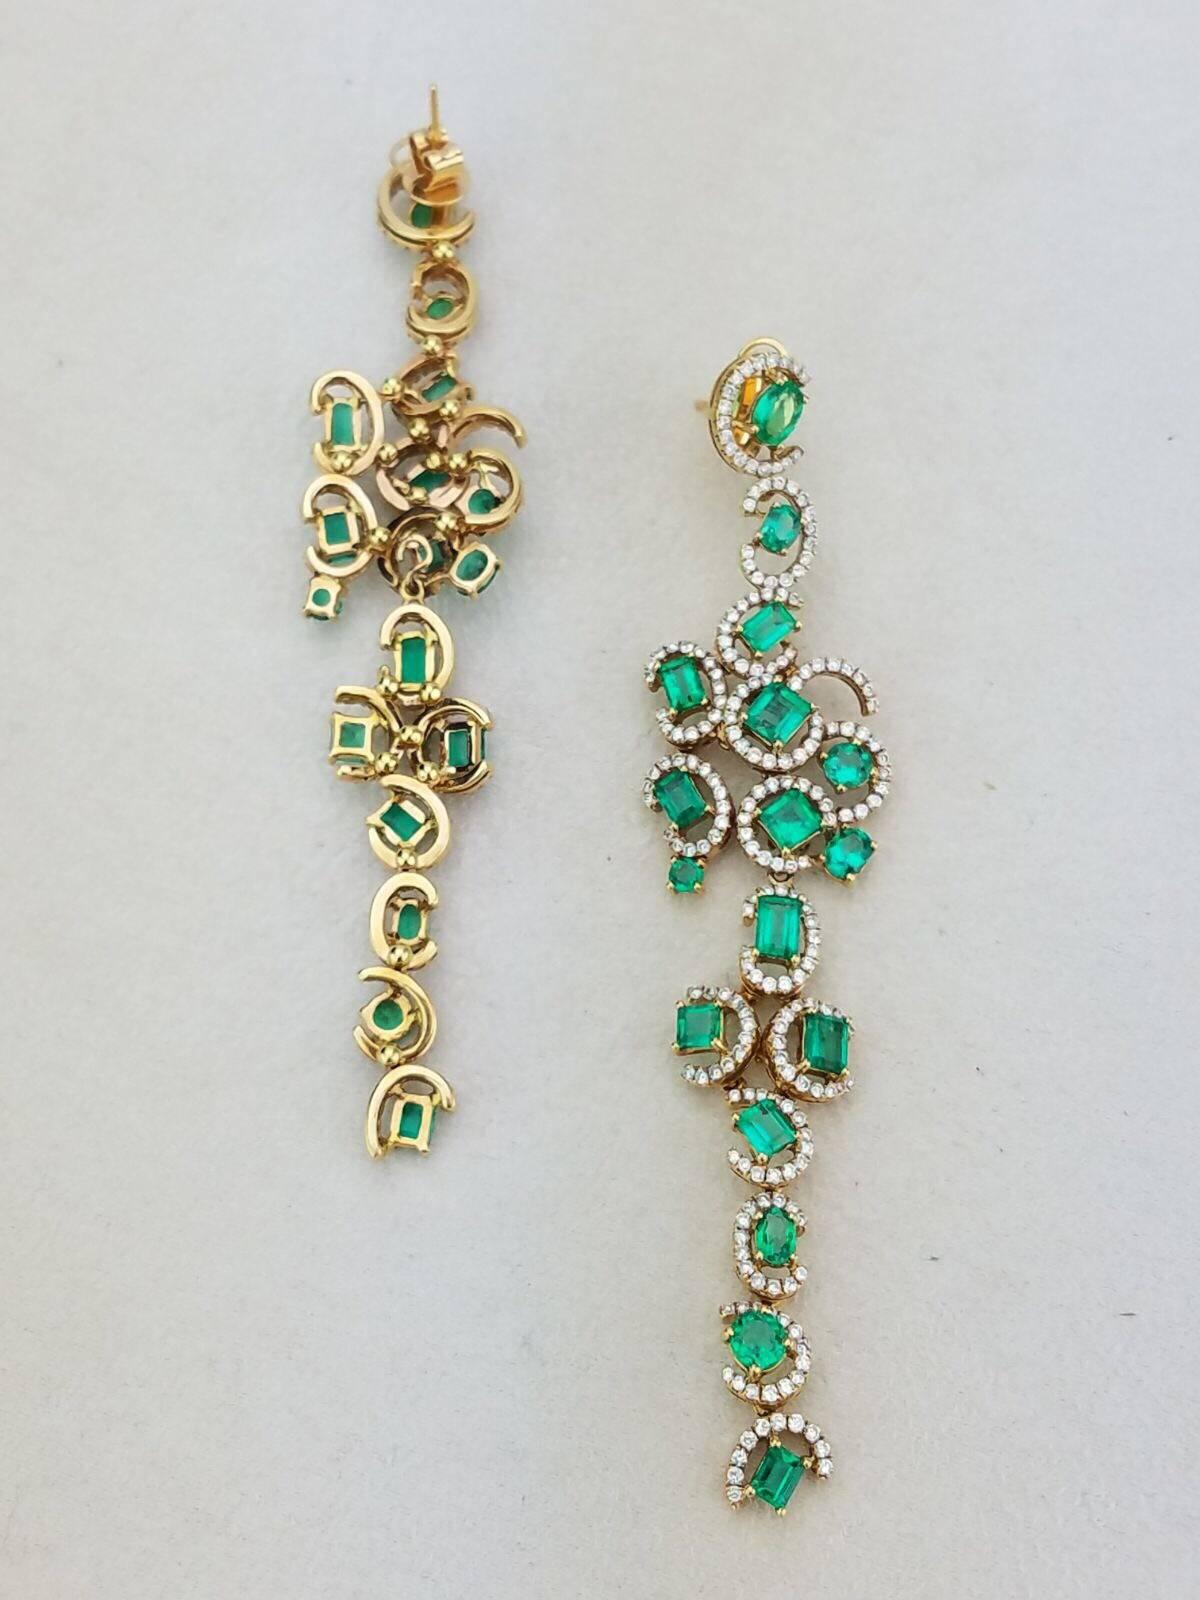 Beautiful, dressy Colombian Emerald and Diamond earrings all set in 18K yellow Gold.

Stone Details:  
Stone: Colombian Emerald
Cut: Mix 
Carat Weight: 8.95 Carat  

Diamond Details: 
Cut: Brilliant cut
Total Carat Weight: 4.00 carat 
Quality: VS/SI